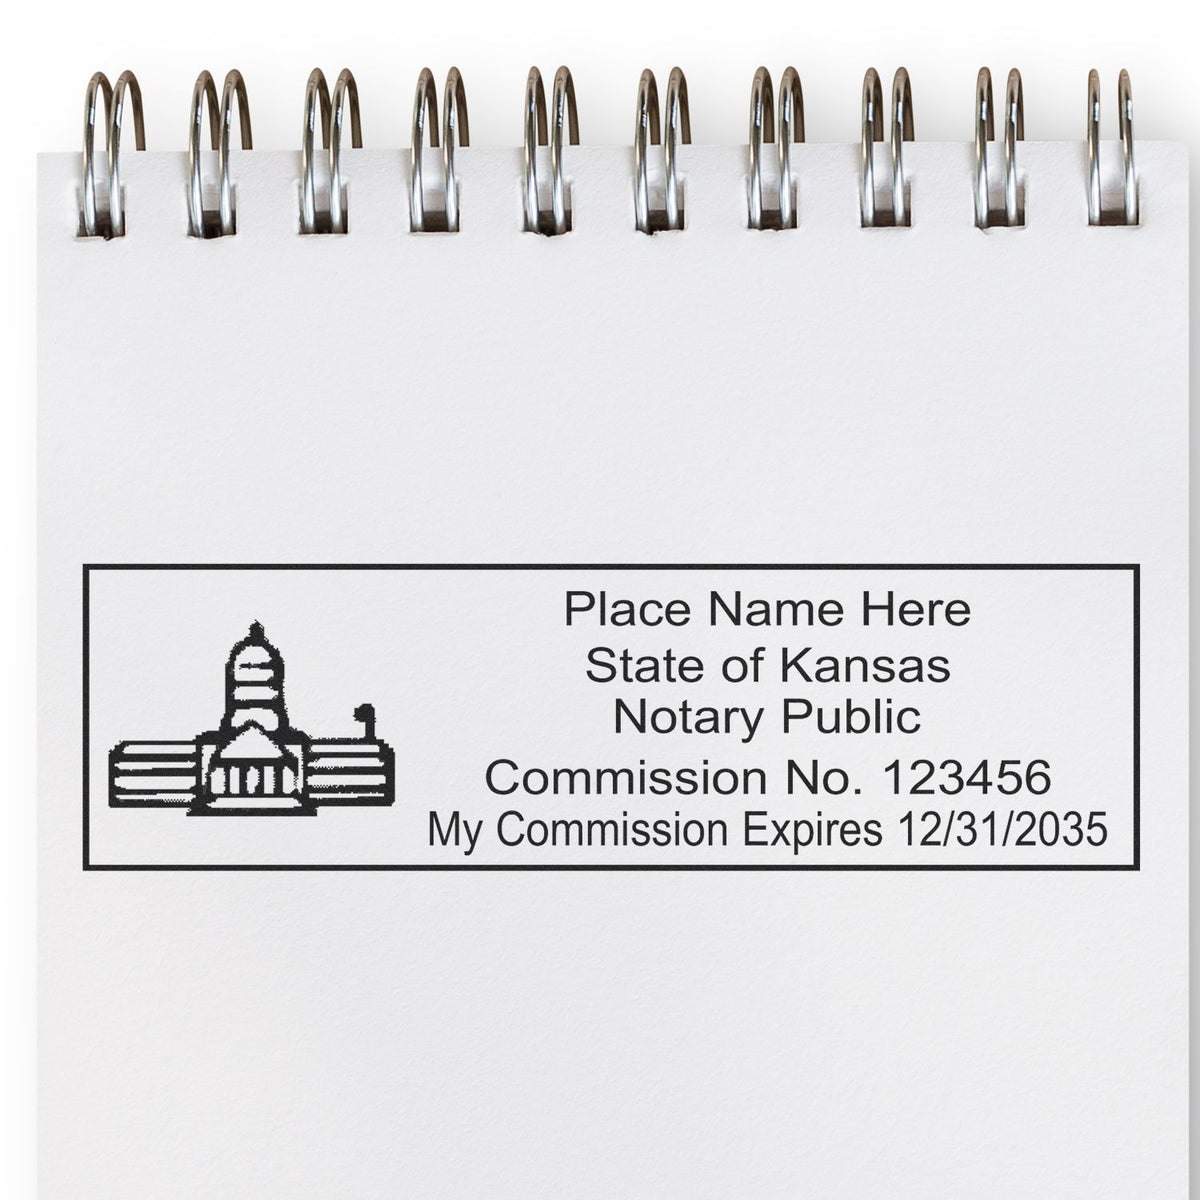 Another Example of a stamped impression of the Self-Inking State Seal Kansas Notary Stamp on a piece of office paper.